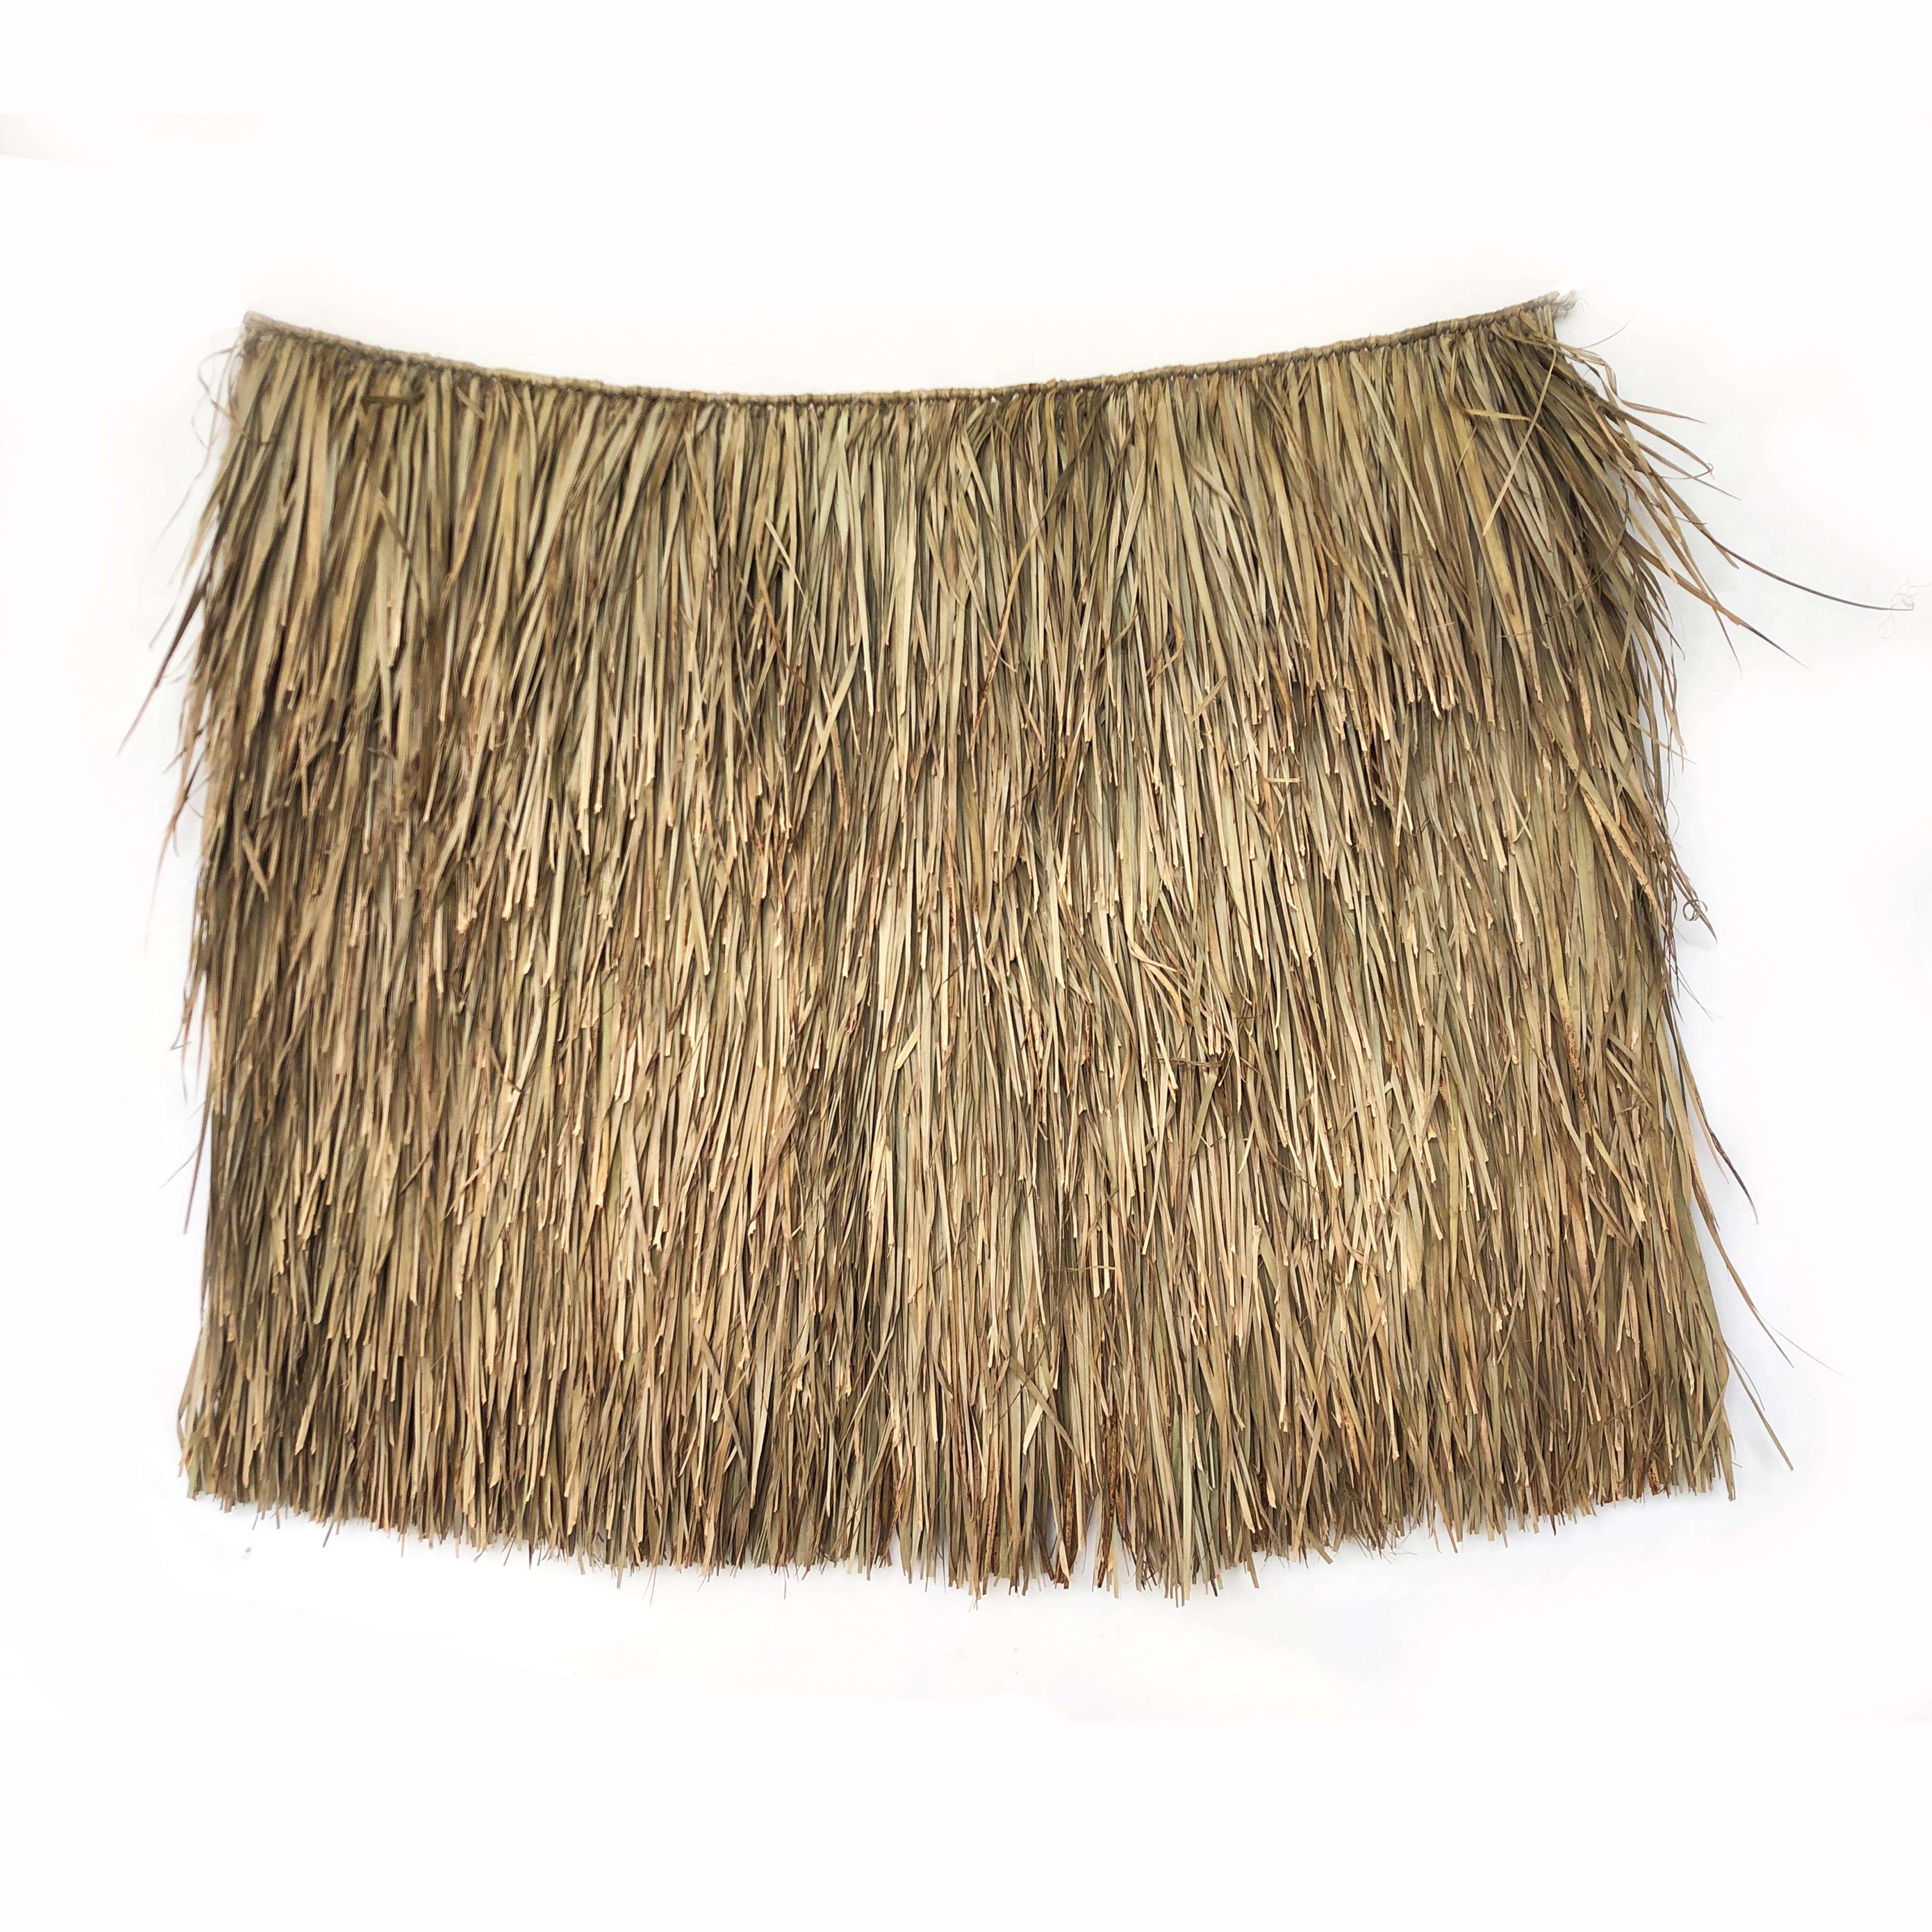 Rare to find raincoat made of braided palm leaves. Of pre-Hispanic origin, it is a woven garment that protects against the rain. Also known as Capisayo in or Capote in other parts of southern Mexico.
Perfect for wall decoration.